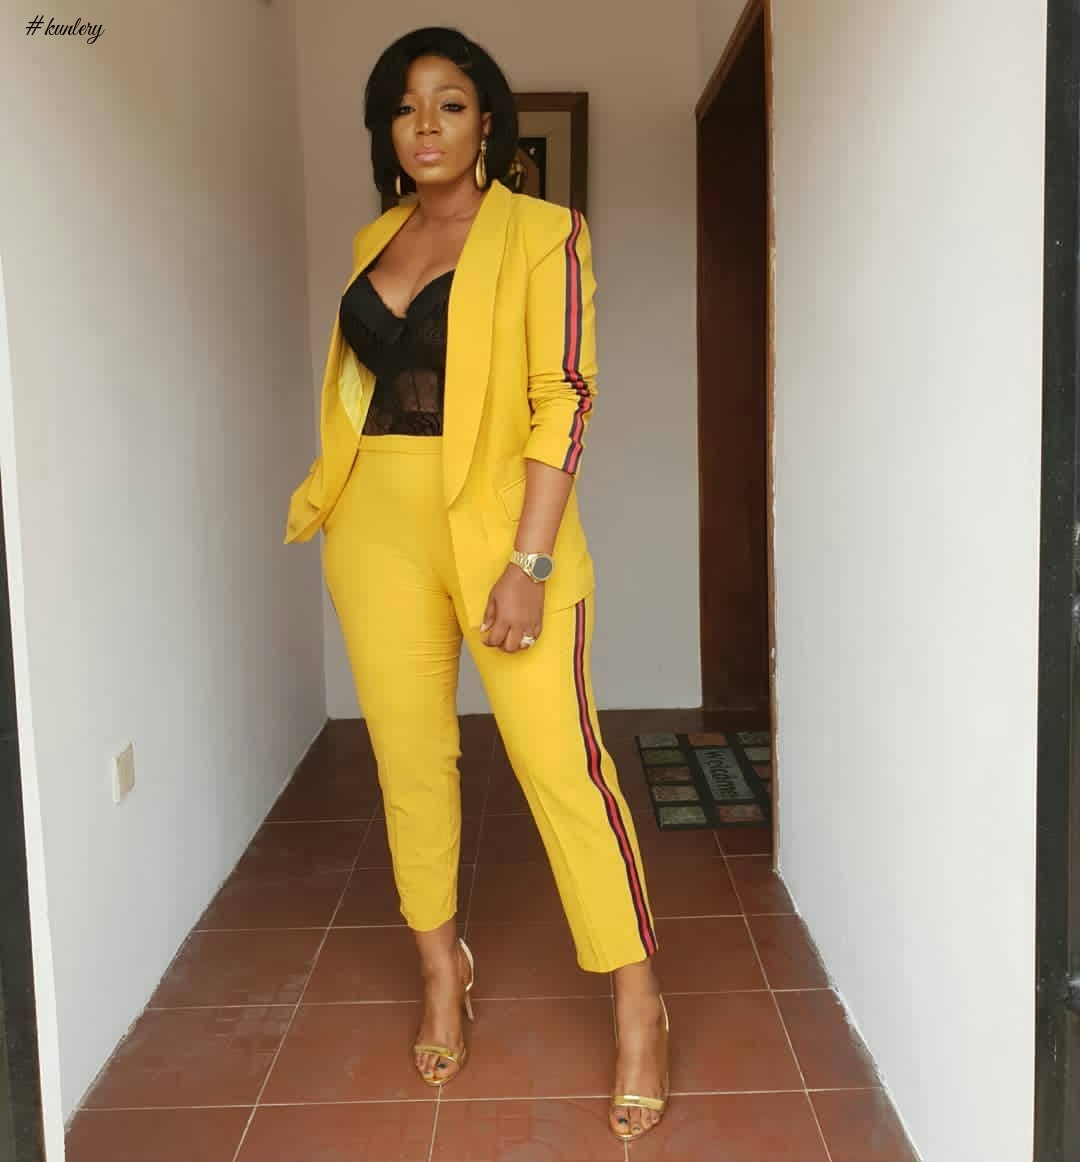 SWEET AND STUNNING CORPORATE ATTIRES TO SLAY TO WORK THIS WEEK